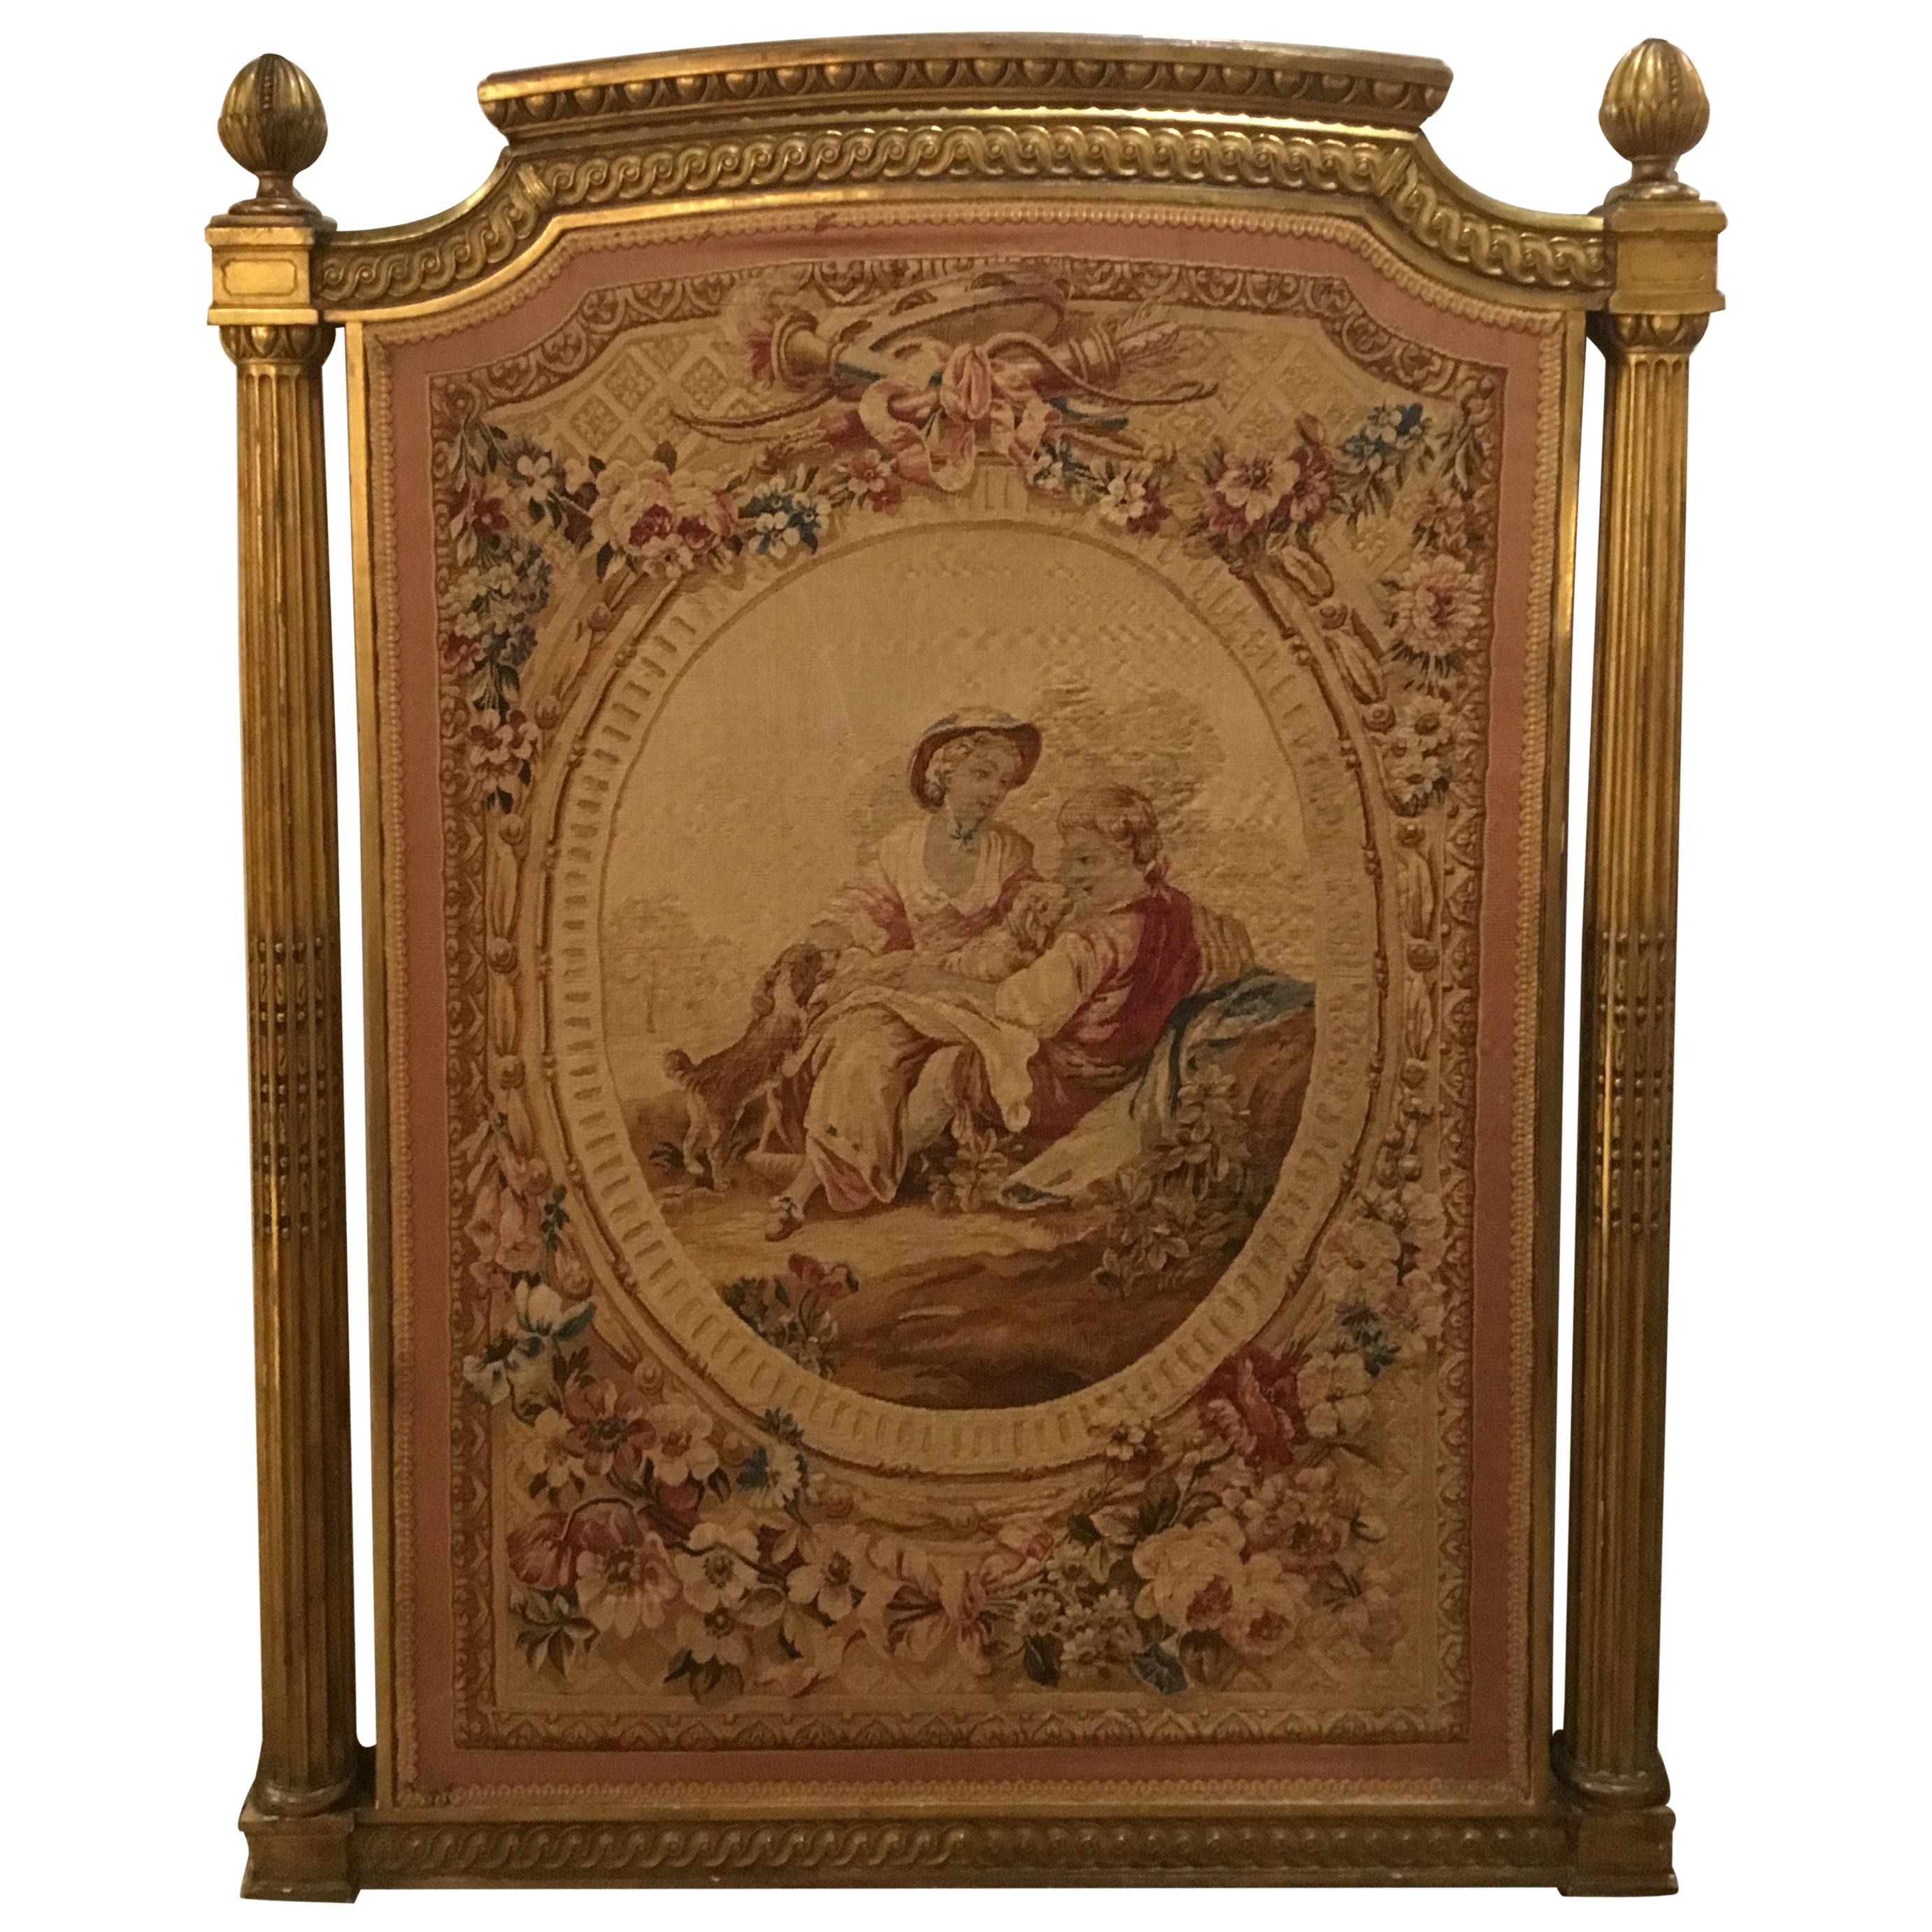 French Aubusson Tapestry in Giltwood Frame, 19th Century, with Garden Scene